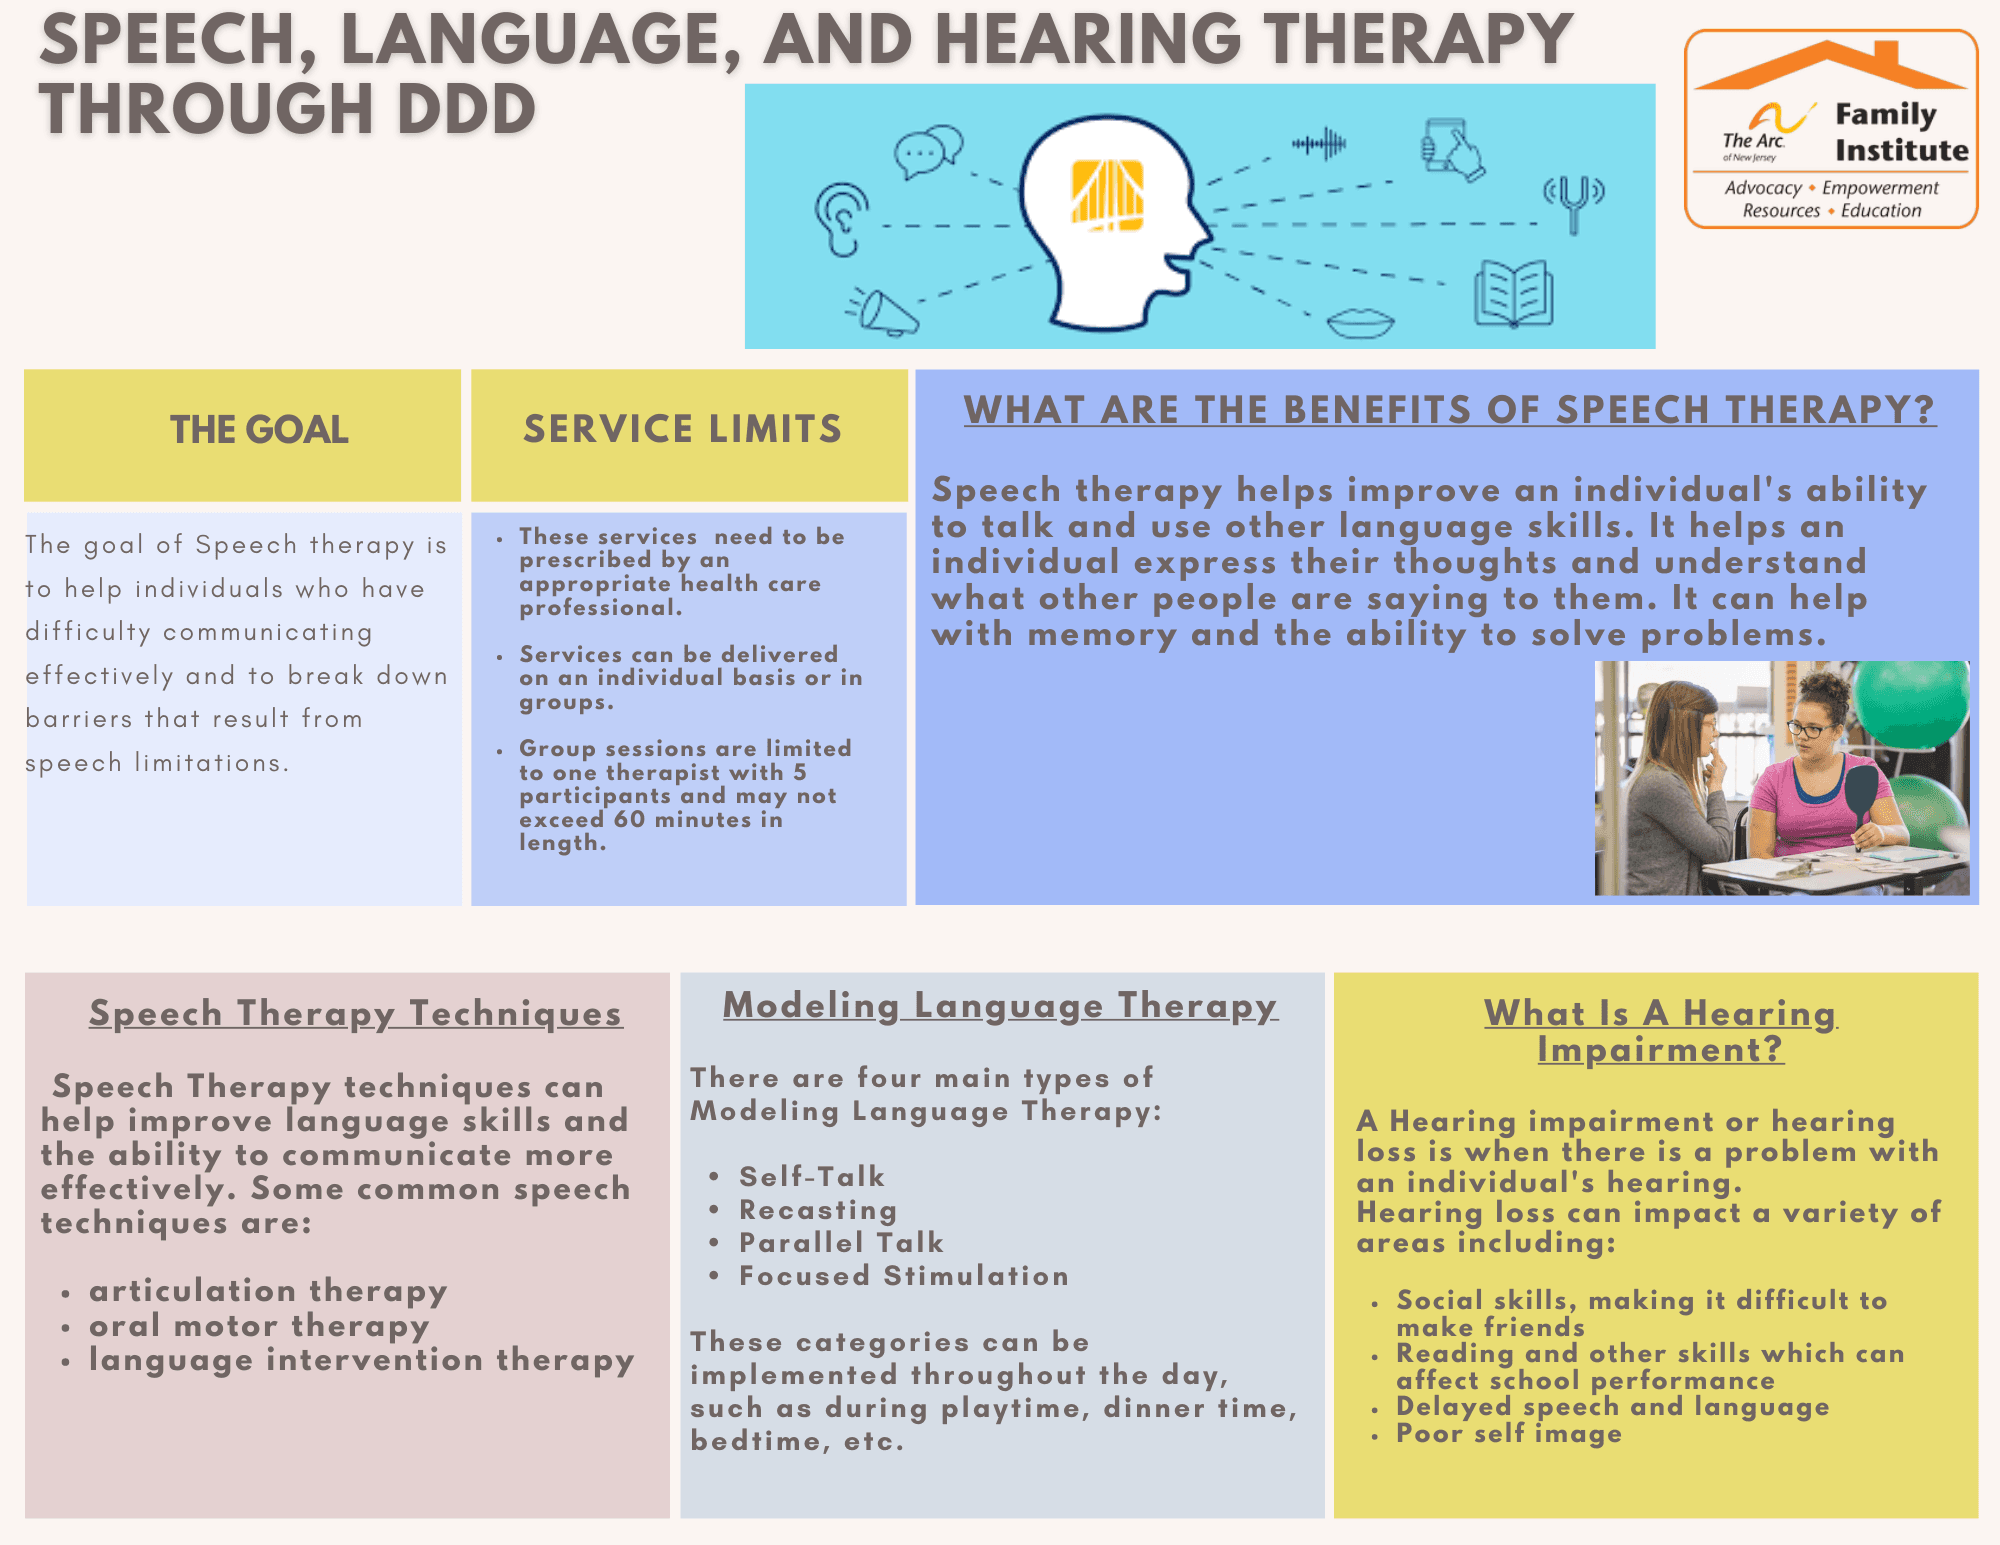 Speech, Language, and Hearing Therapy